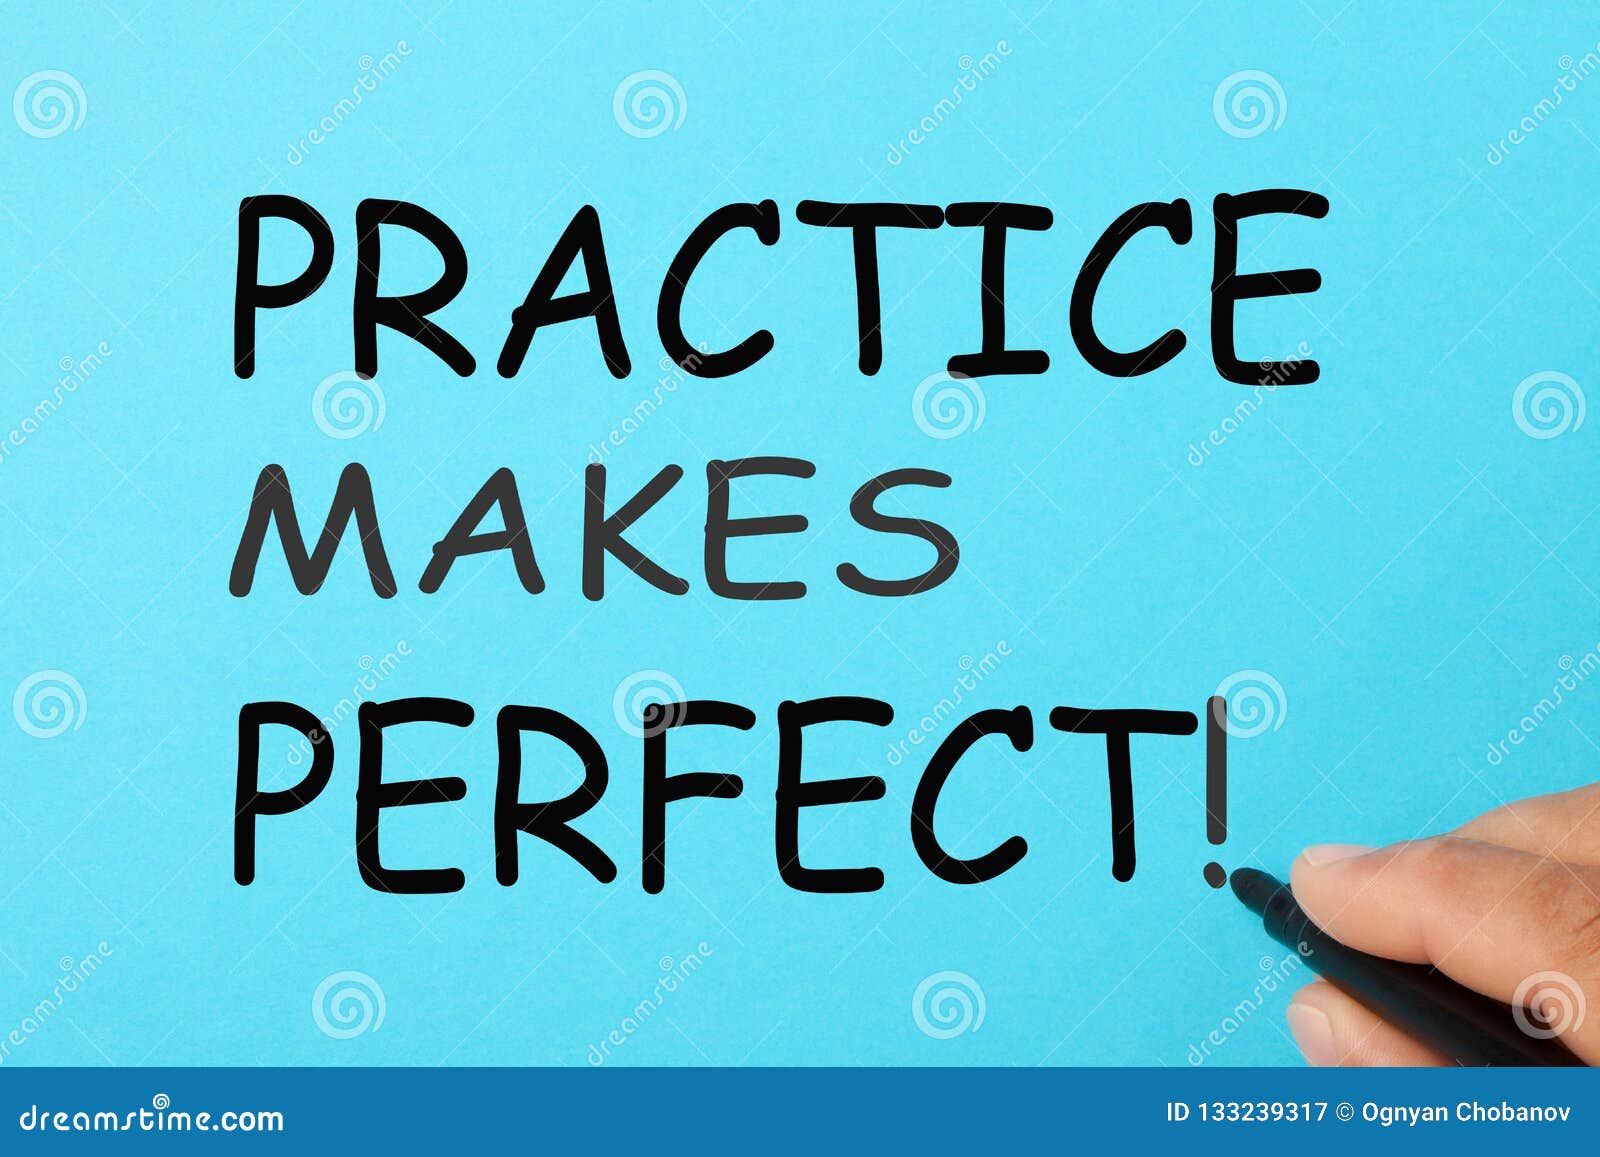 Practice Makes Perfect Or Something ðŸ˜�